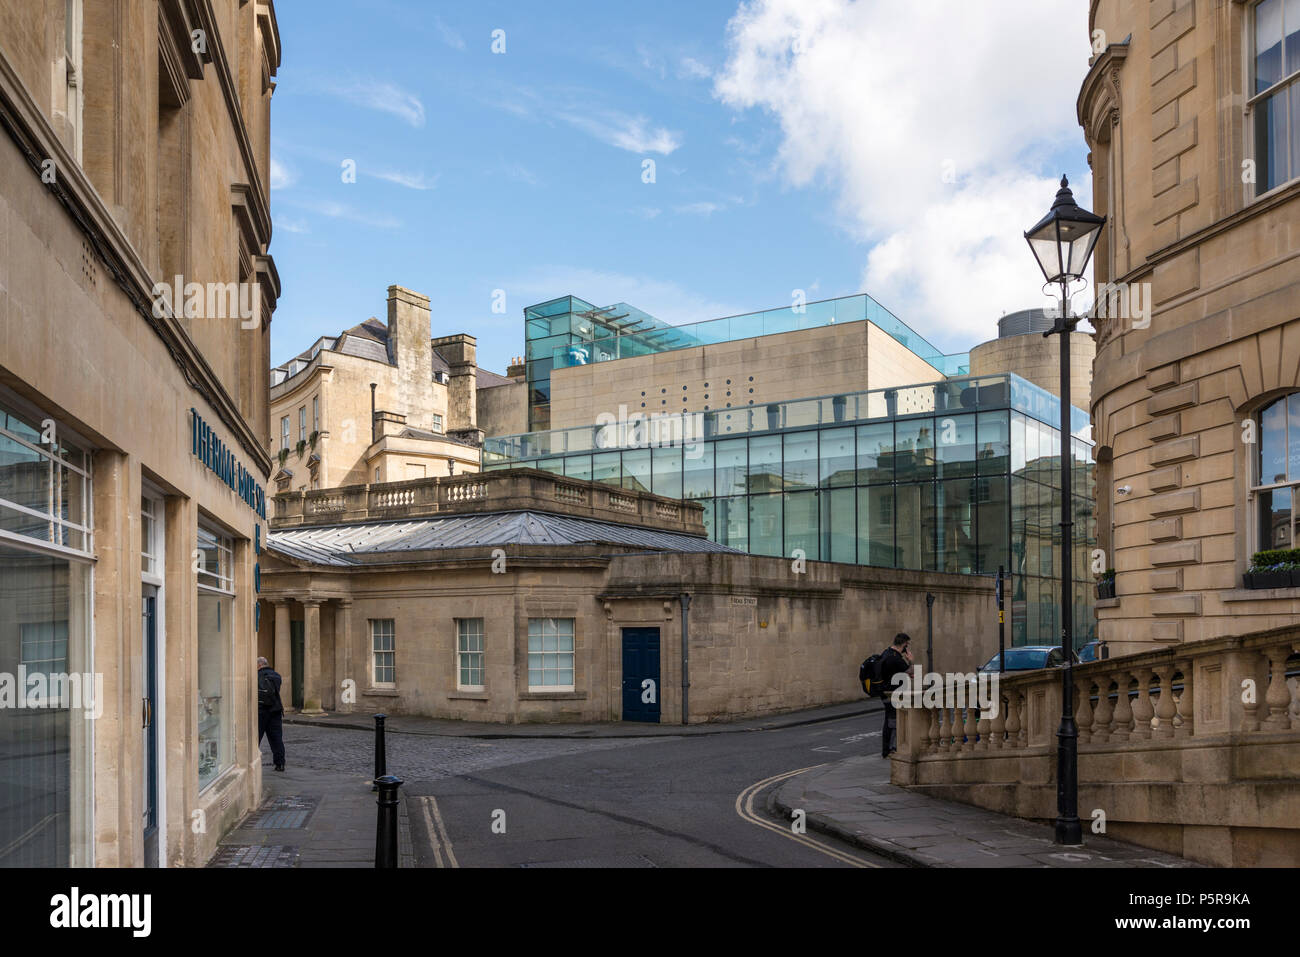 Juxtaposition of old and new buildings in Bath, Somerset, UK Stock Photo